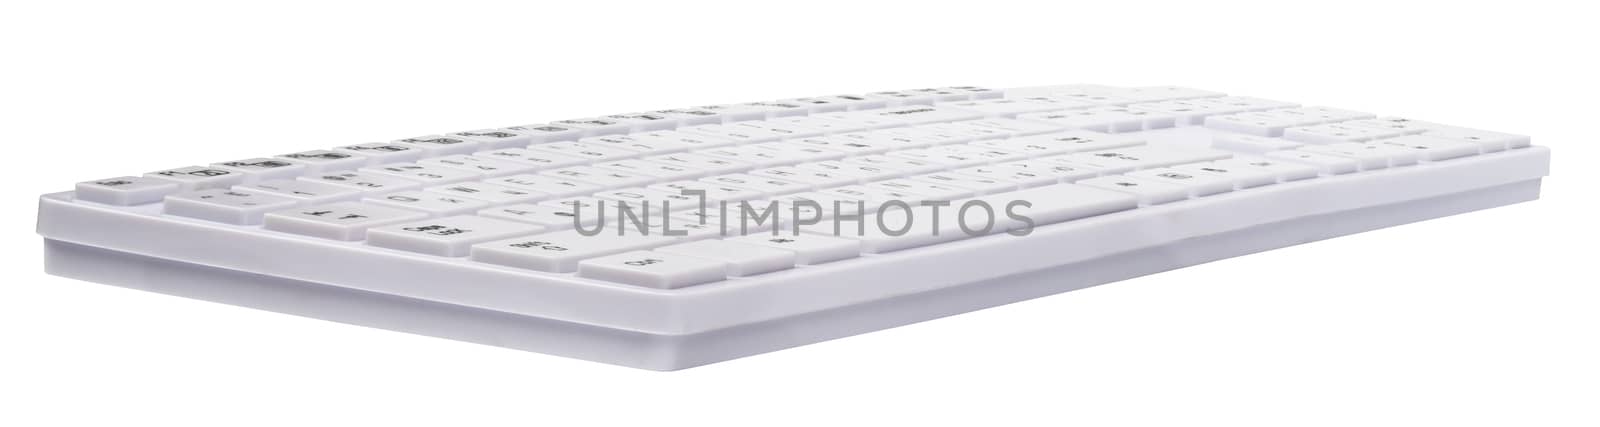 Computer keyboard on isolated white background, side view